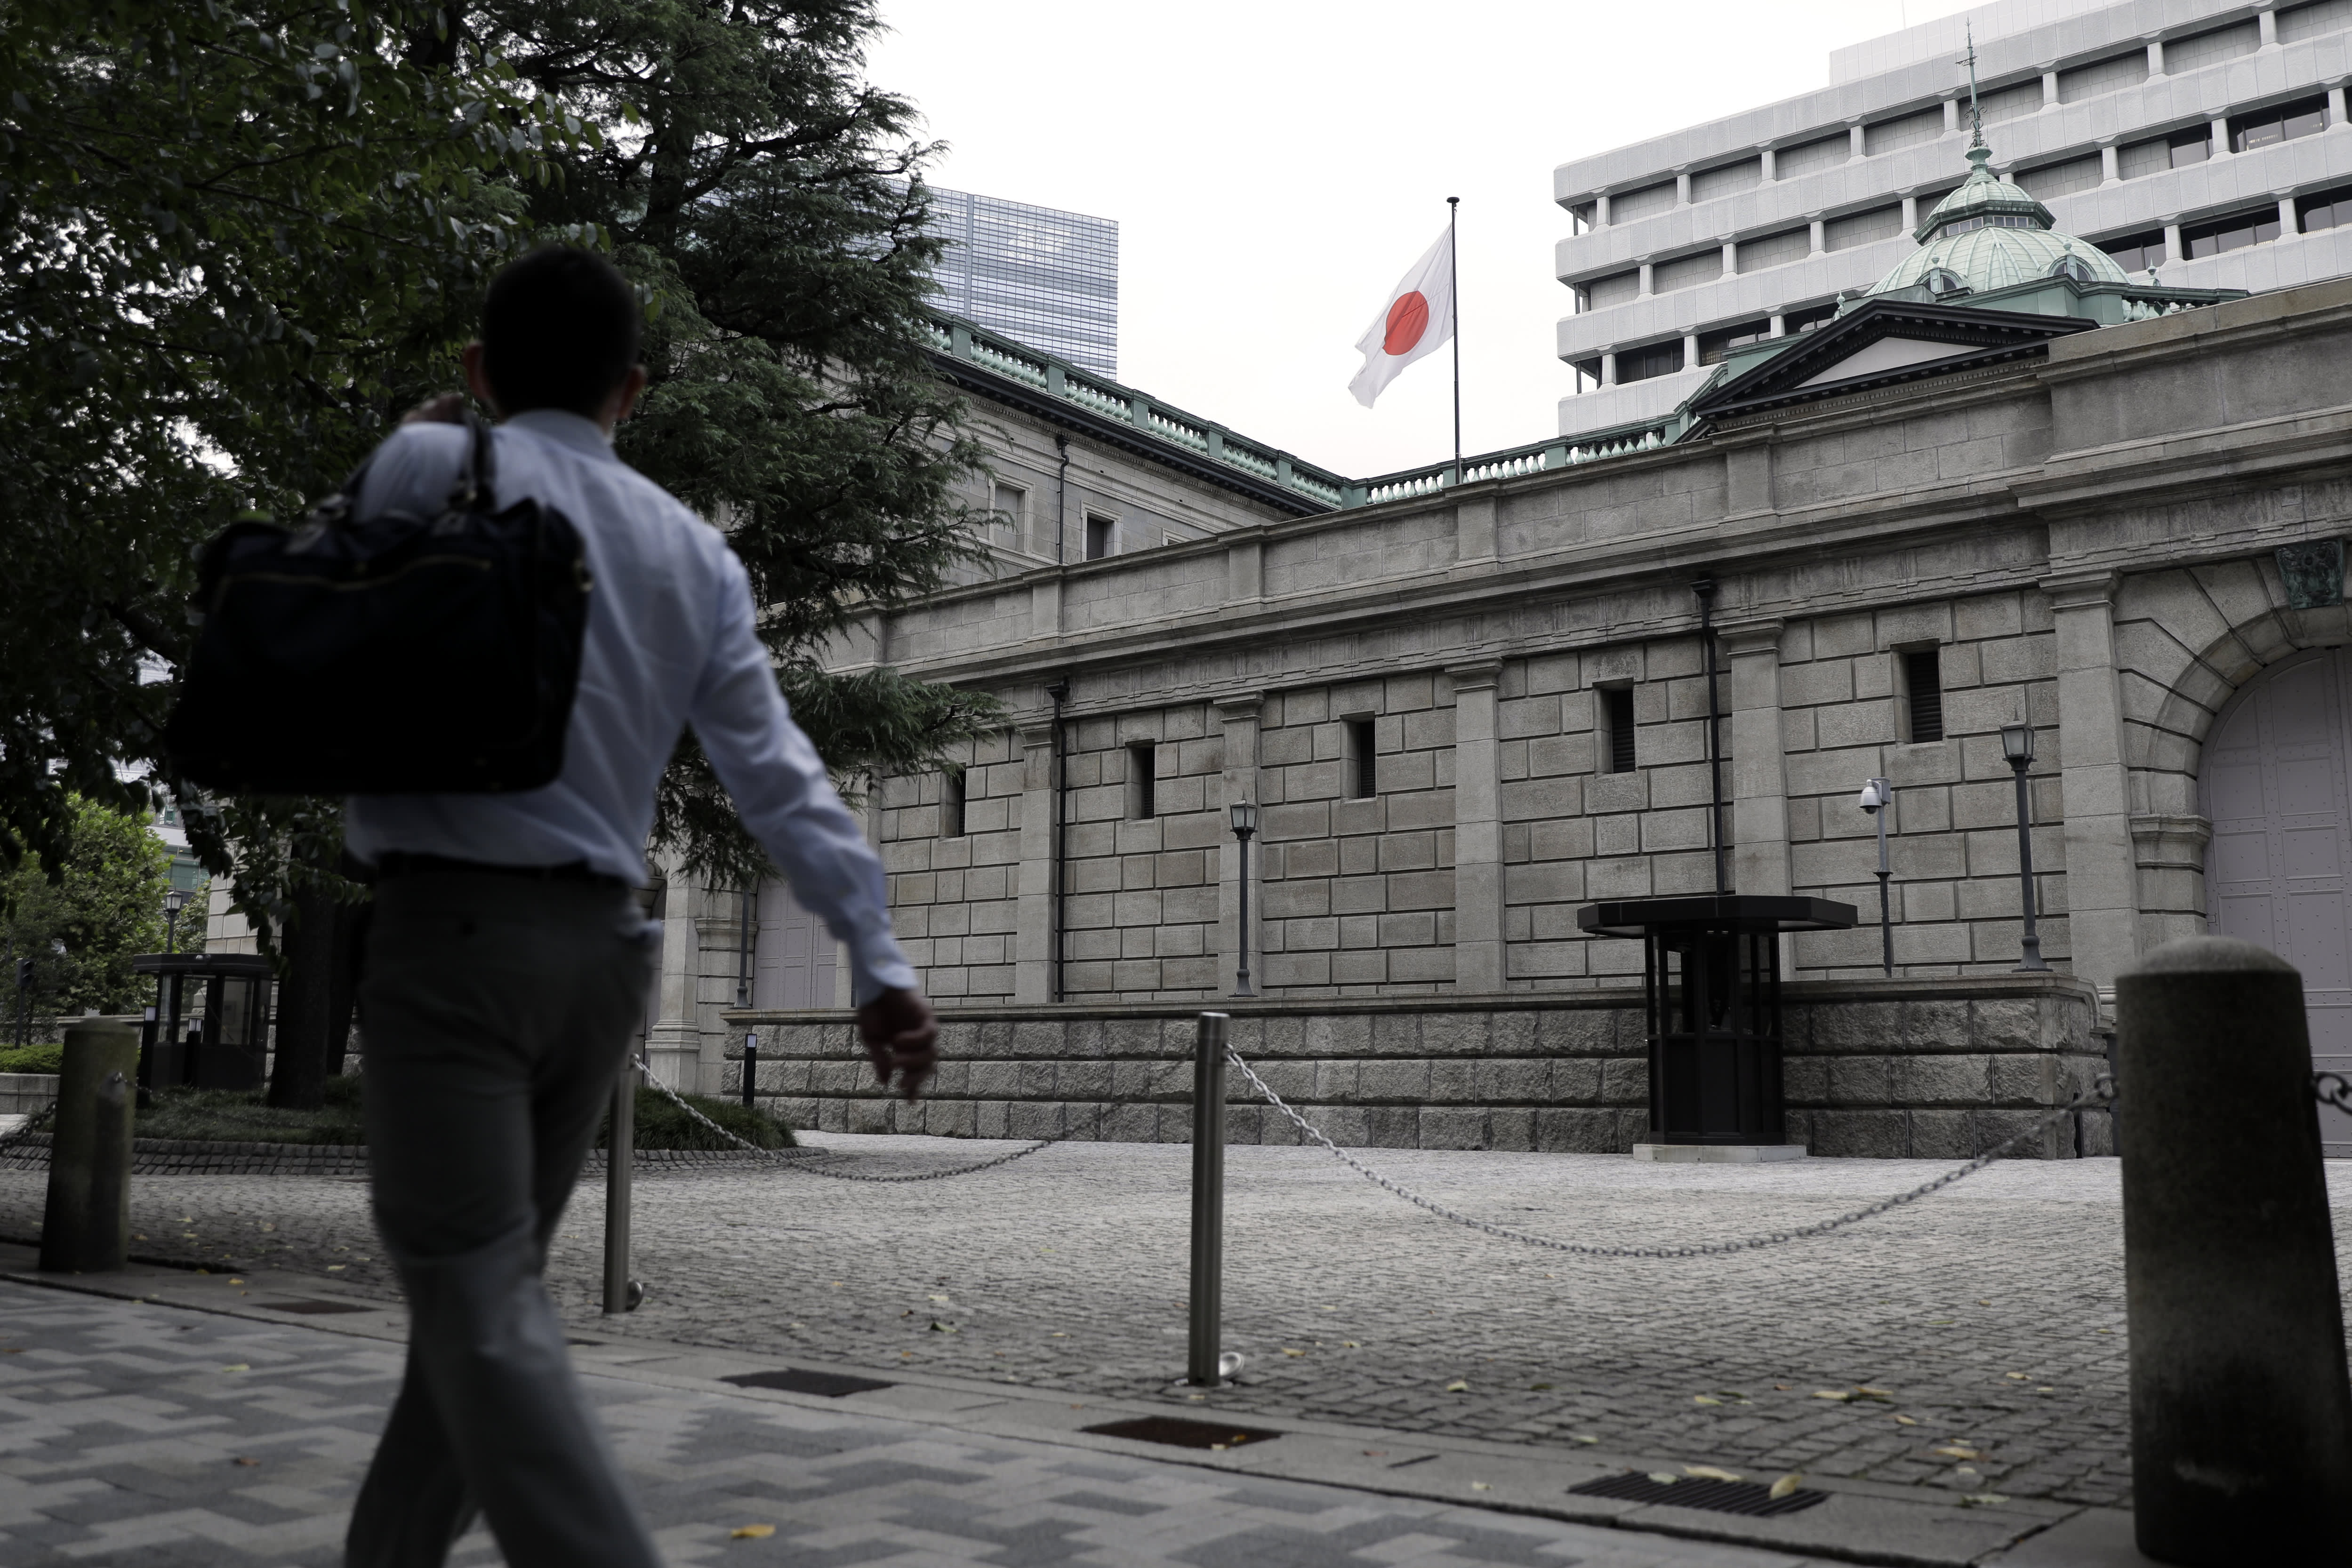 The Bank of Japan may have an opportunity to start normalizing rates this year, says BofA